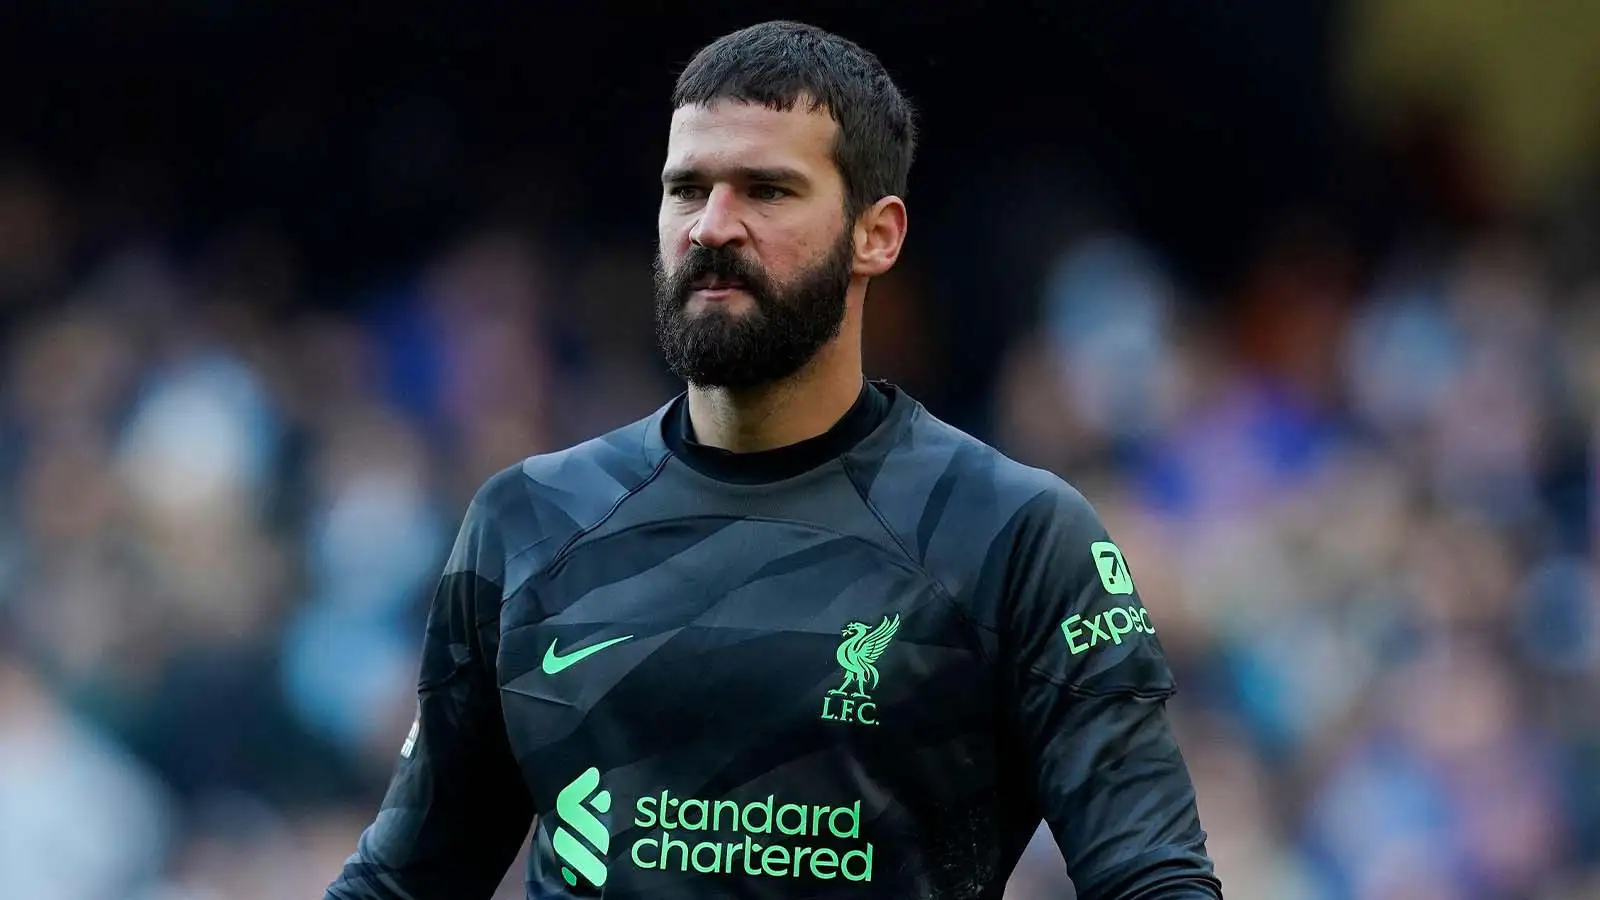 Comparing Liverpool’s Premier League record with and without Alisson since 2018-19